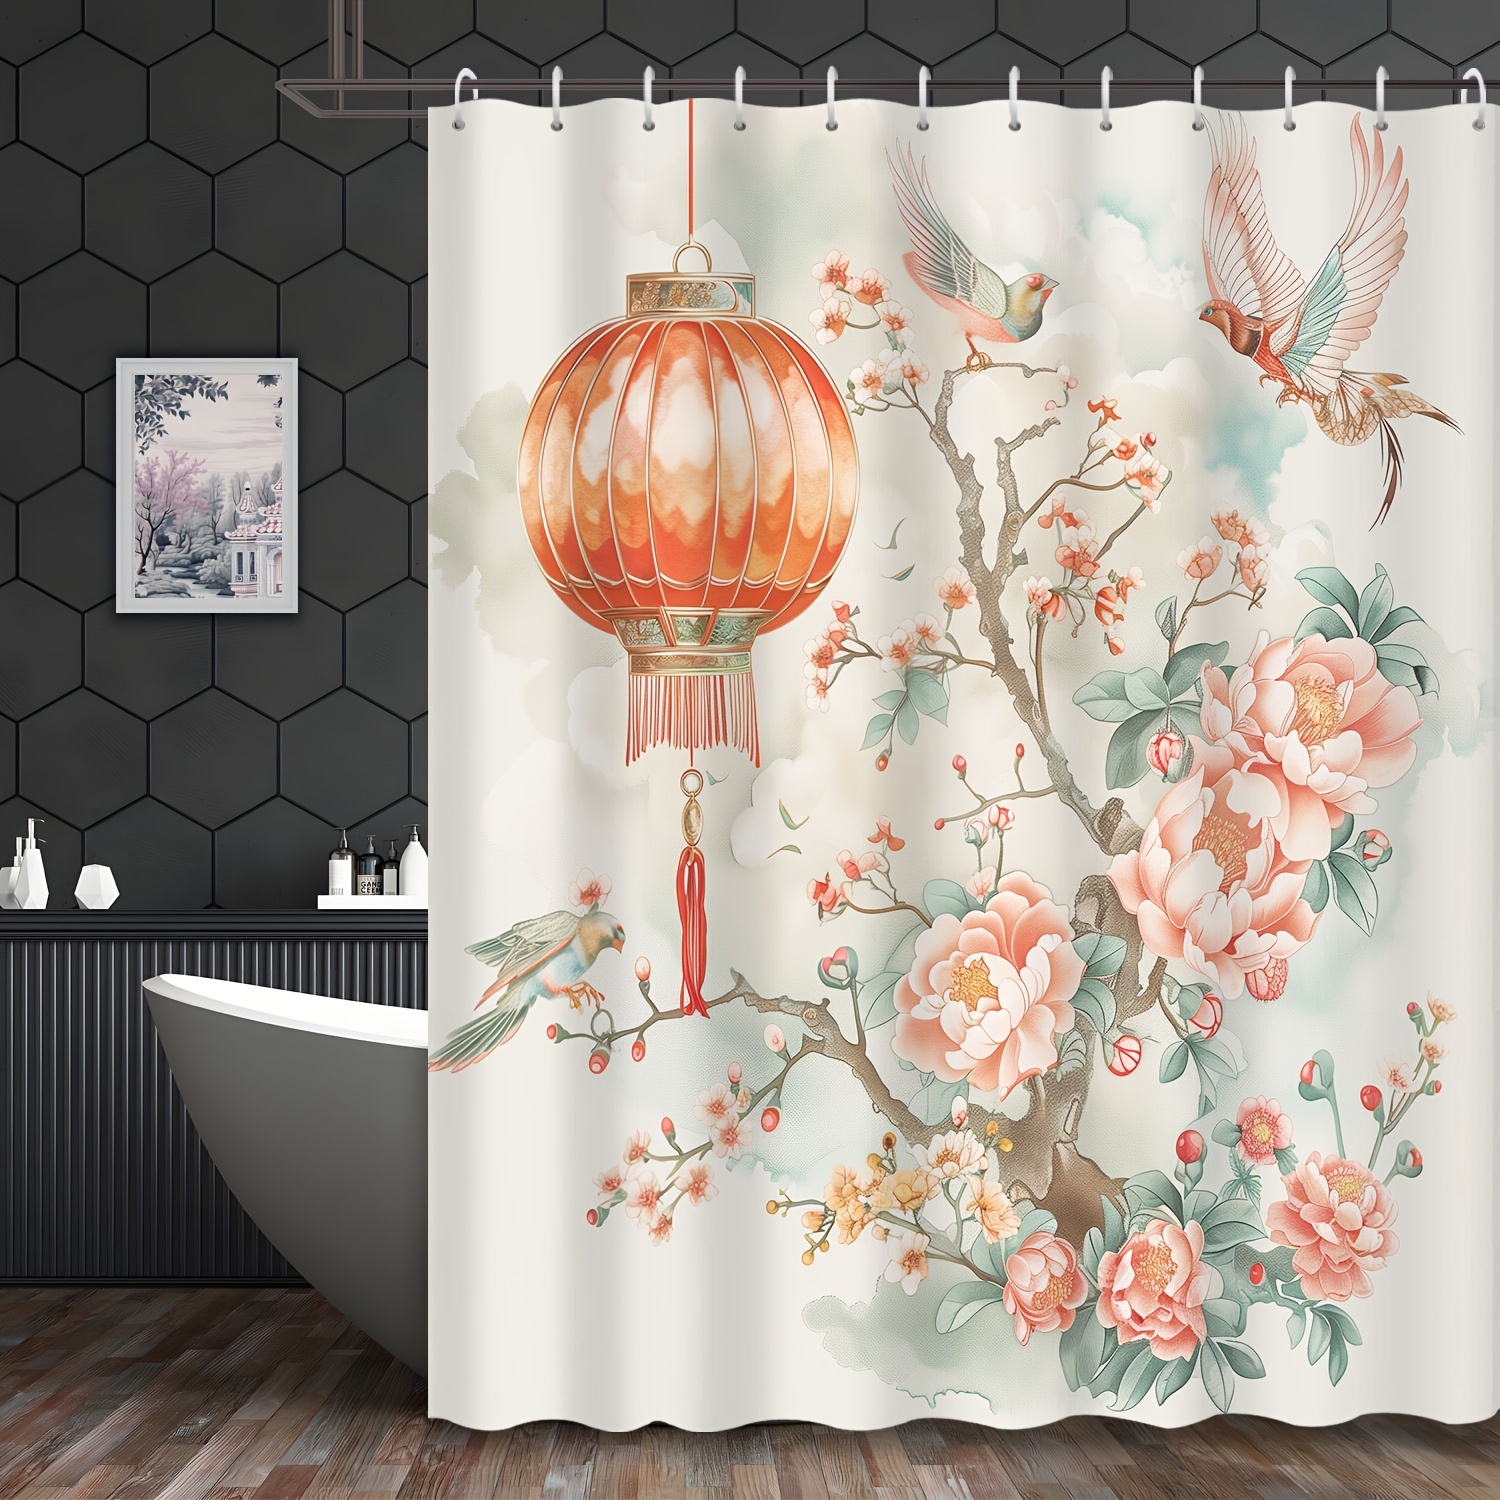 

Elegant Chinese Red Lantern And Peony Bird Print Shower Curtain With 12 Hooks - 72" X 183" - Waterproof, Machine Washable, And Perfect For Hotel, Apartment, Or Bathroom Decor